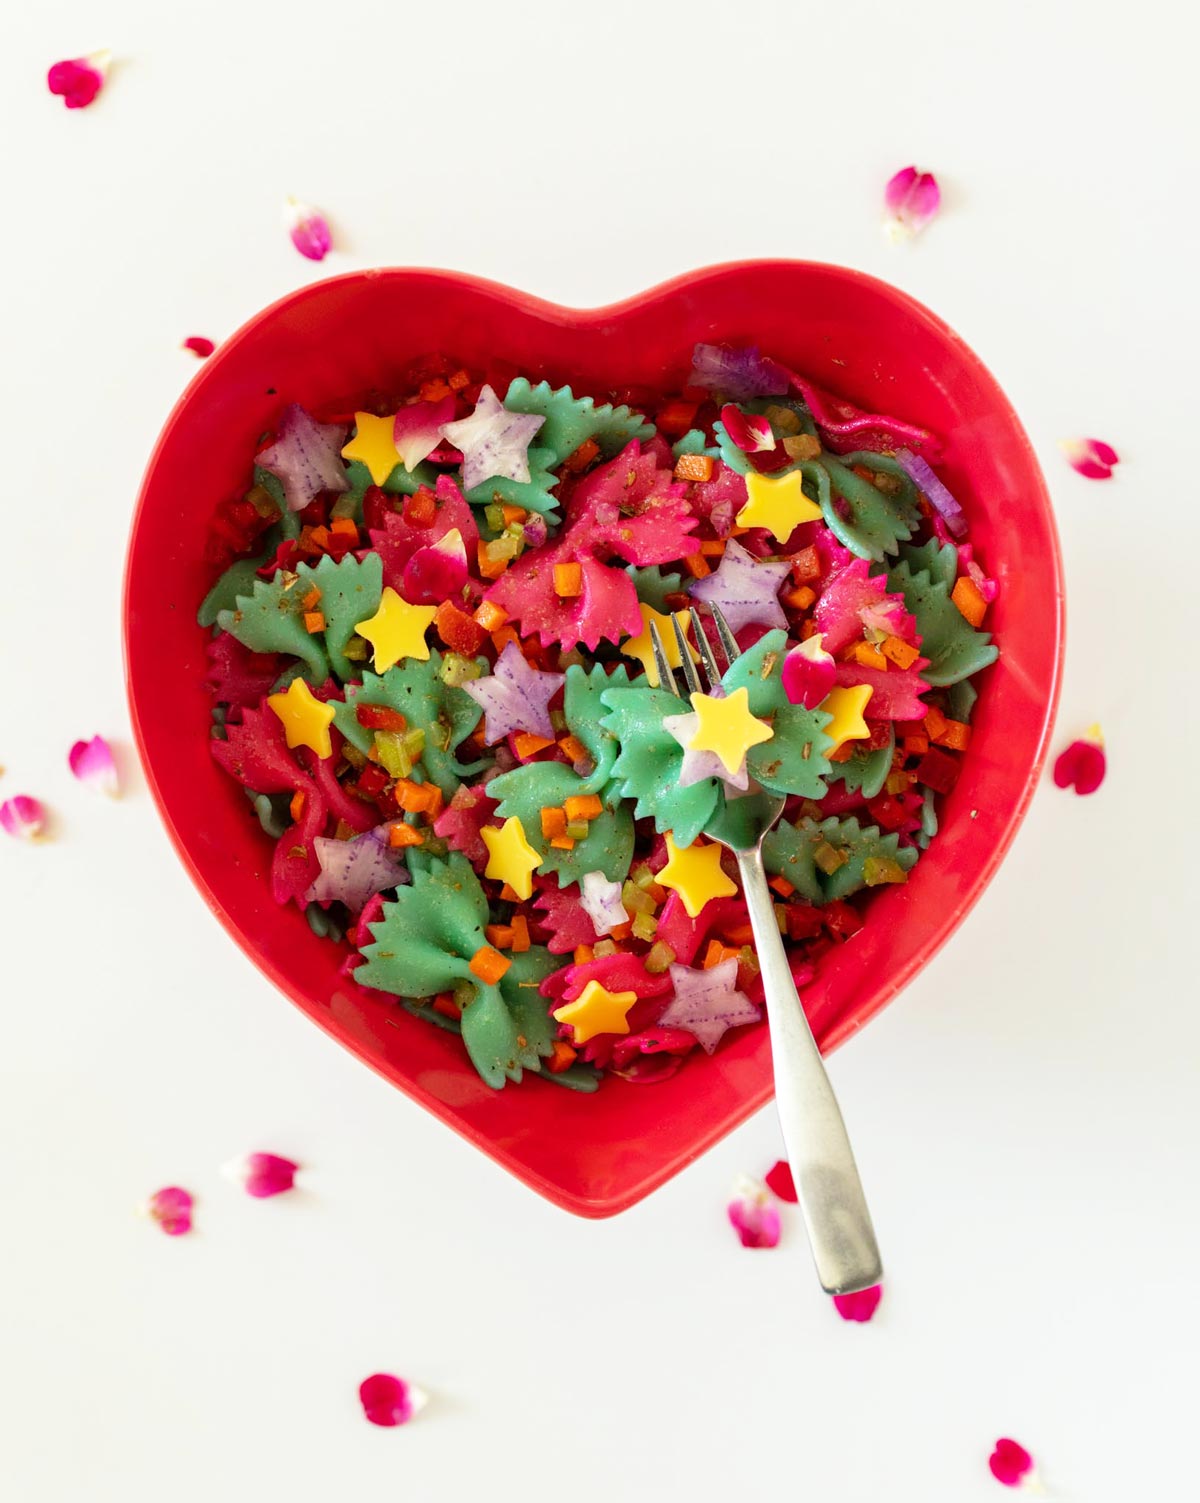 heart shaped bowl filled with multi-colored bowtie shaped pasta and cheese stars and rose petals